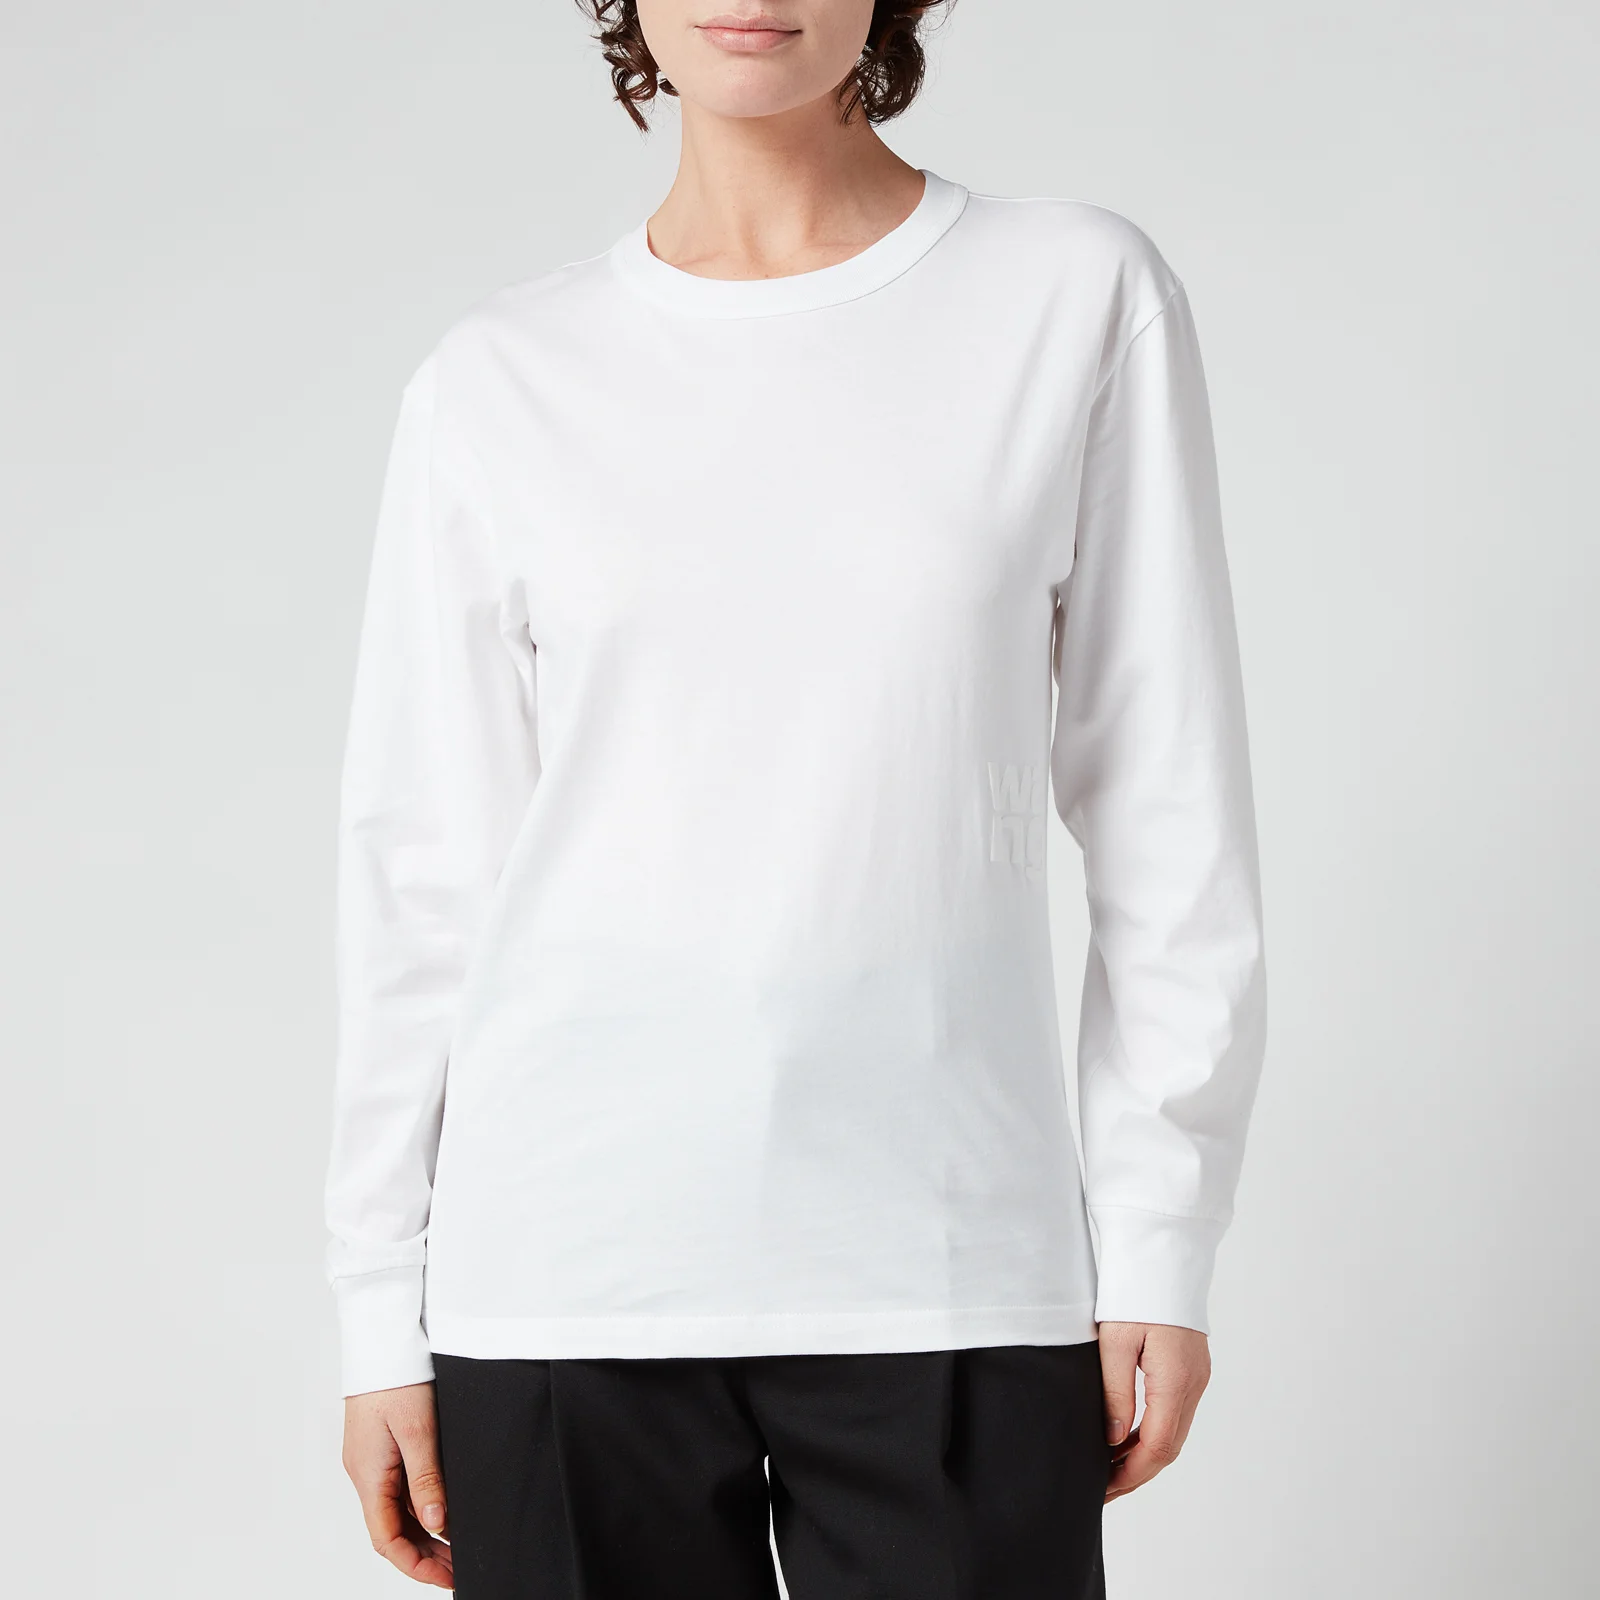 Alexander Wang Women's Foundation Jersey Long Sleeve T-Shirt with Puff Logo & Bound Neck - White Image 1